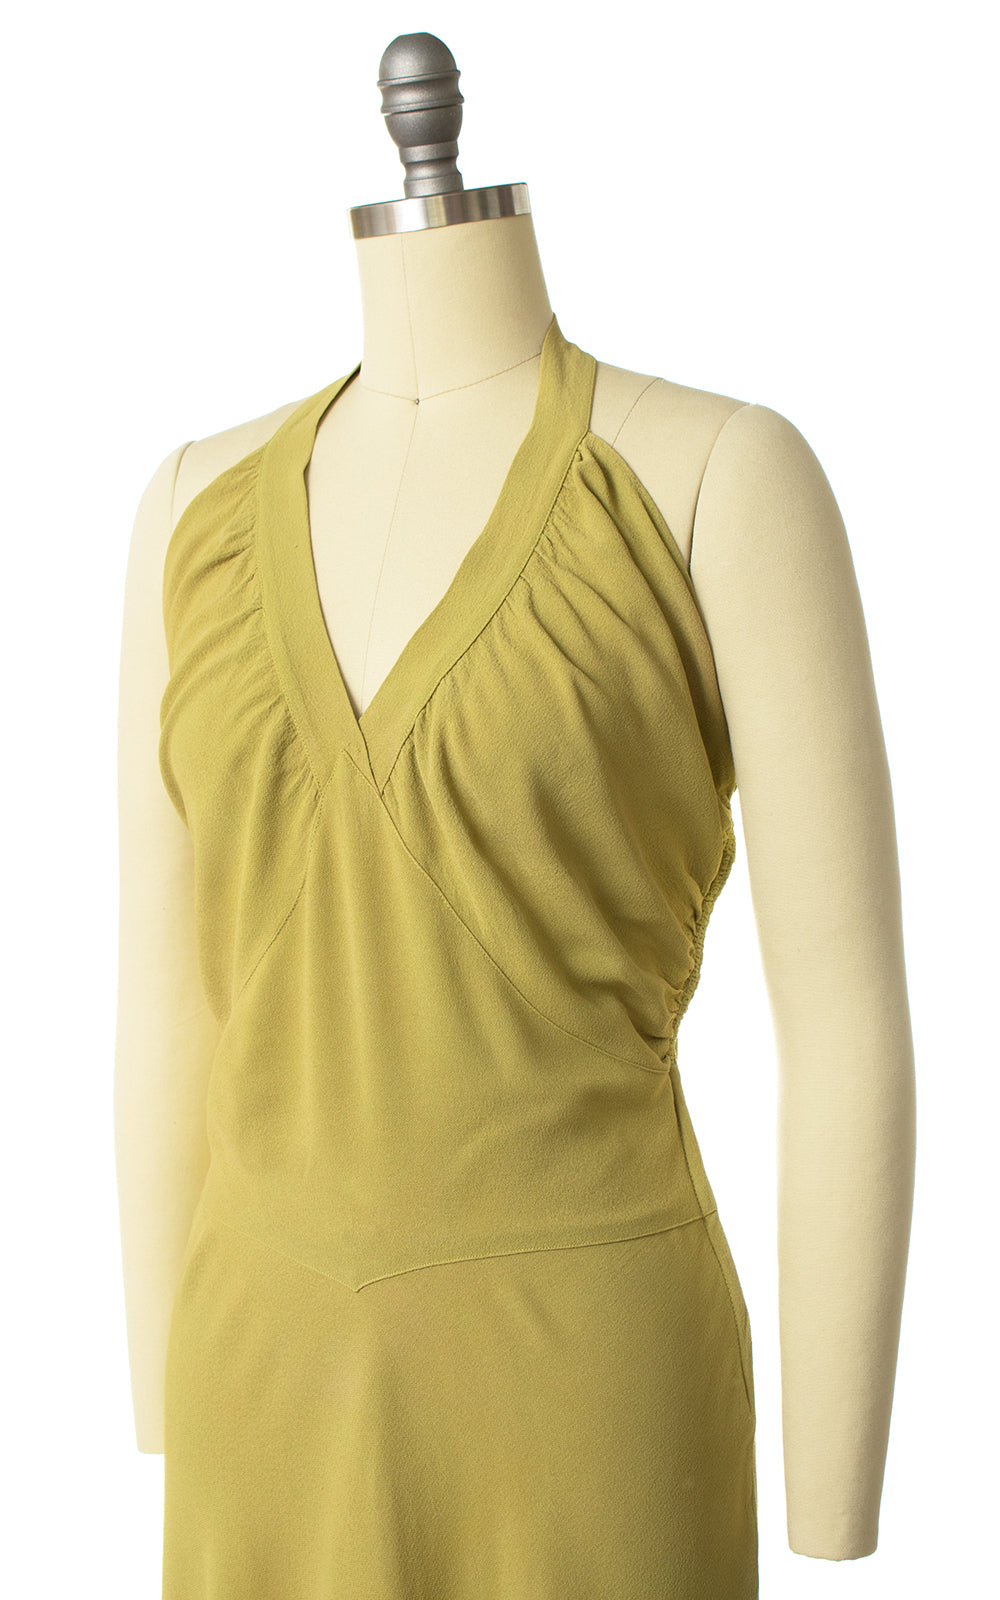 1930s Chartreuse Bias Cut Rayon Crepe Gown